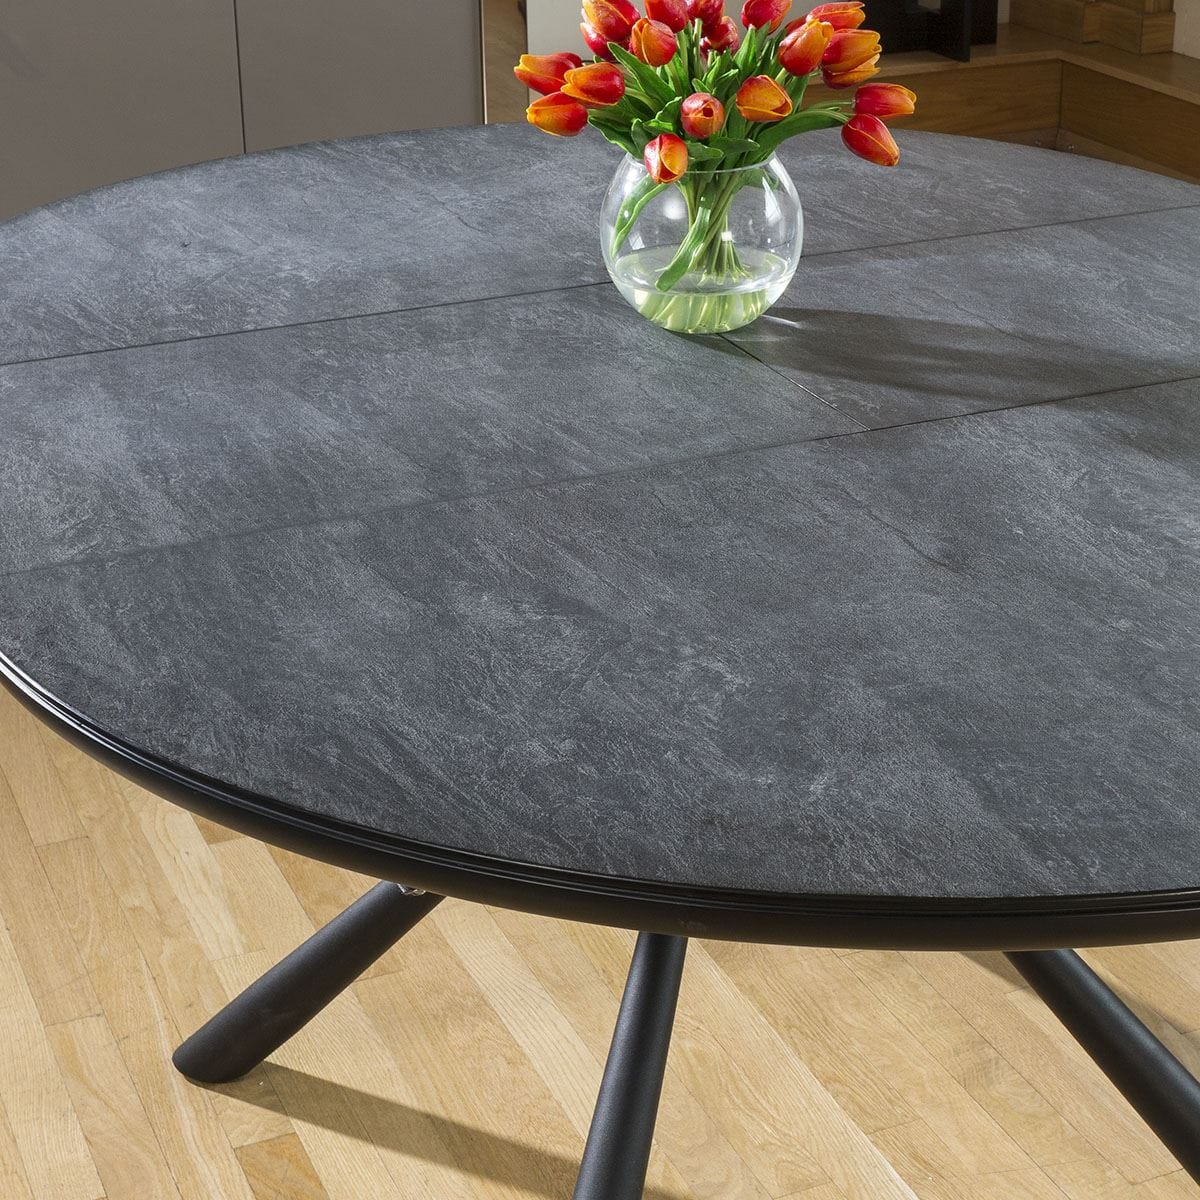 Quatropi Round Slate Effect Melamine Dining Table Extends +4 Grey Fabric Chairs